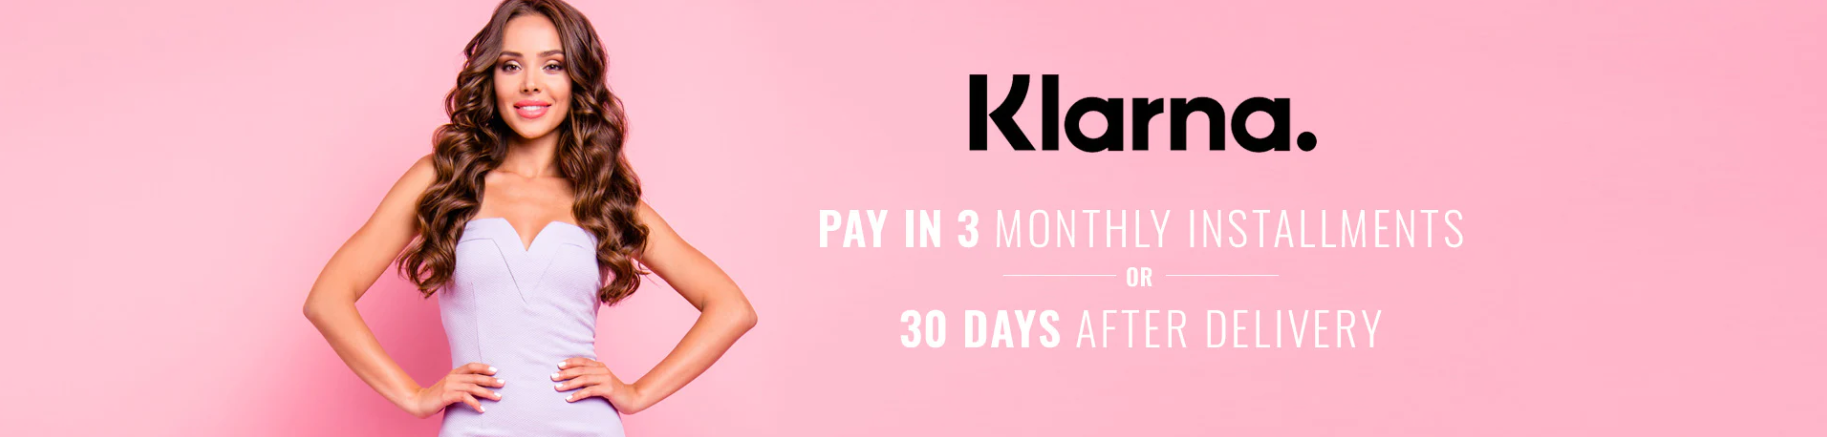 Klarna monthly payments